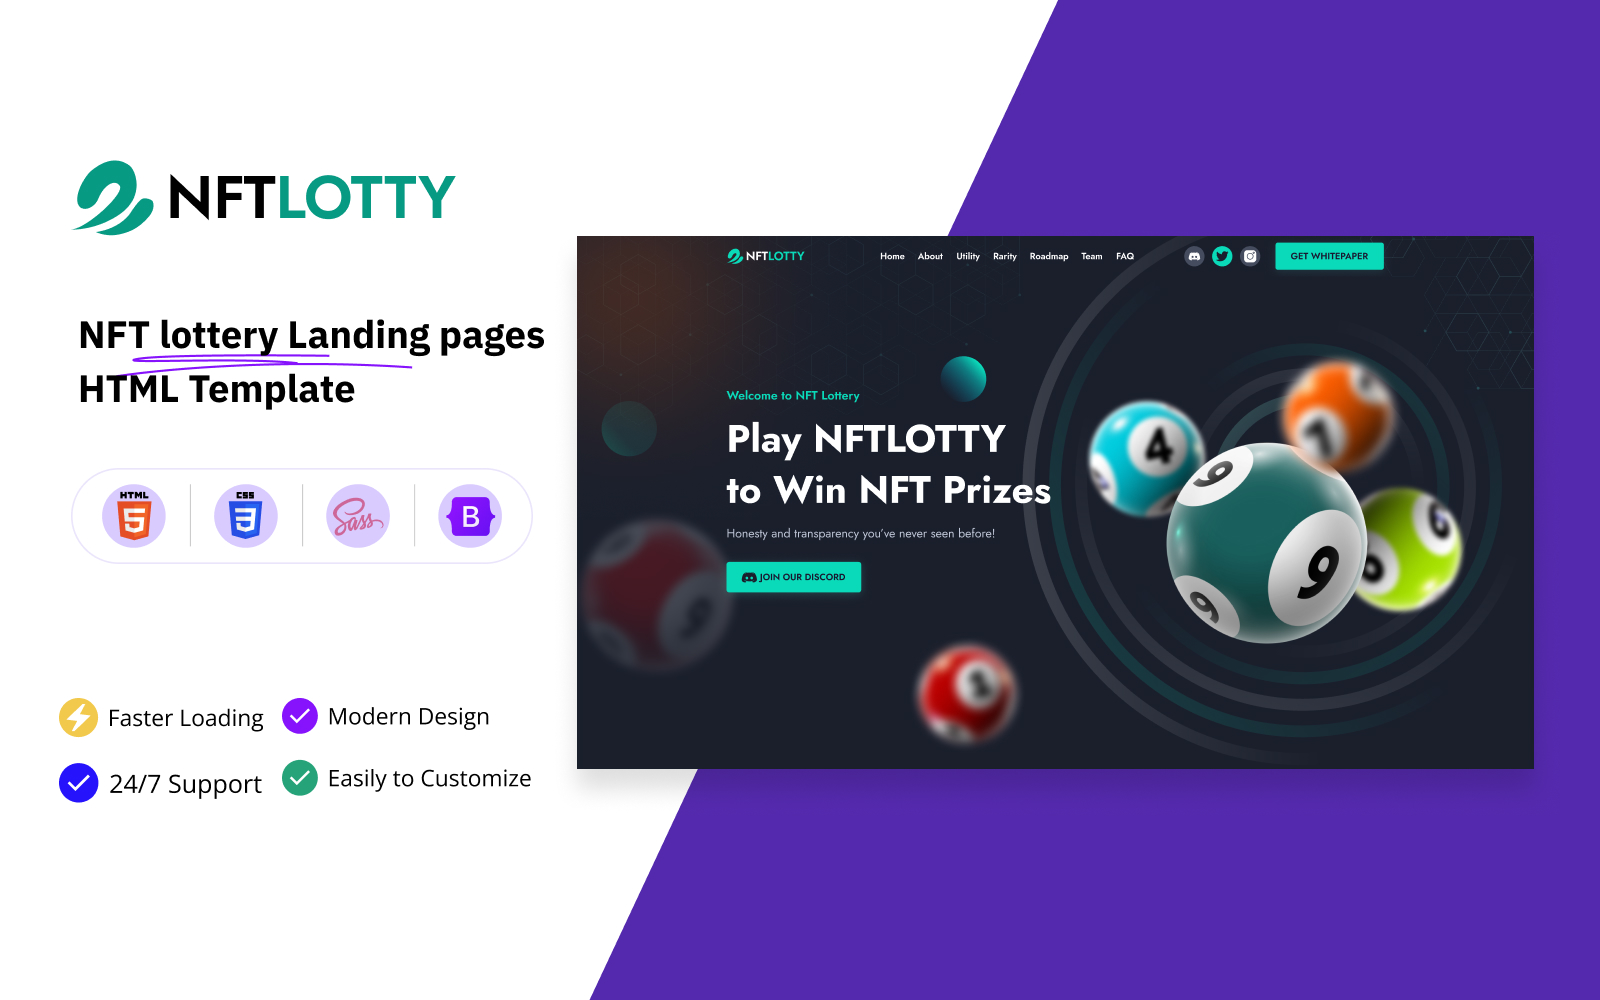 Nftlotty - NFT lottery Landing pages HTML Template